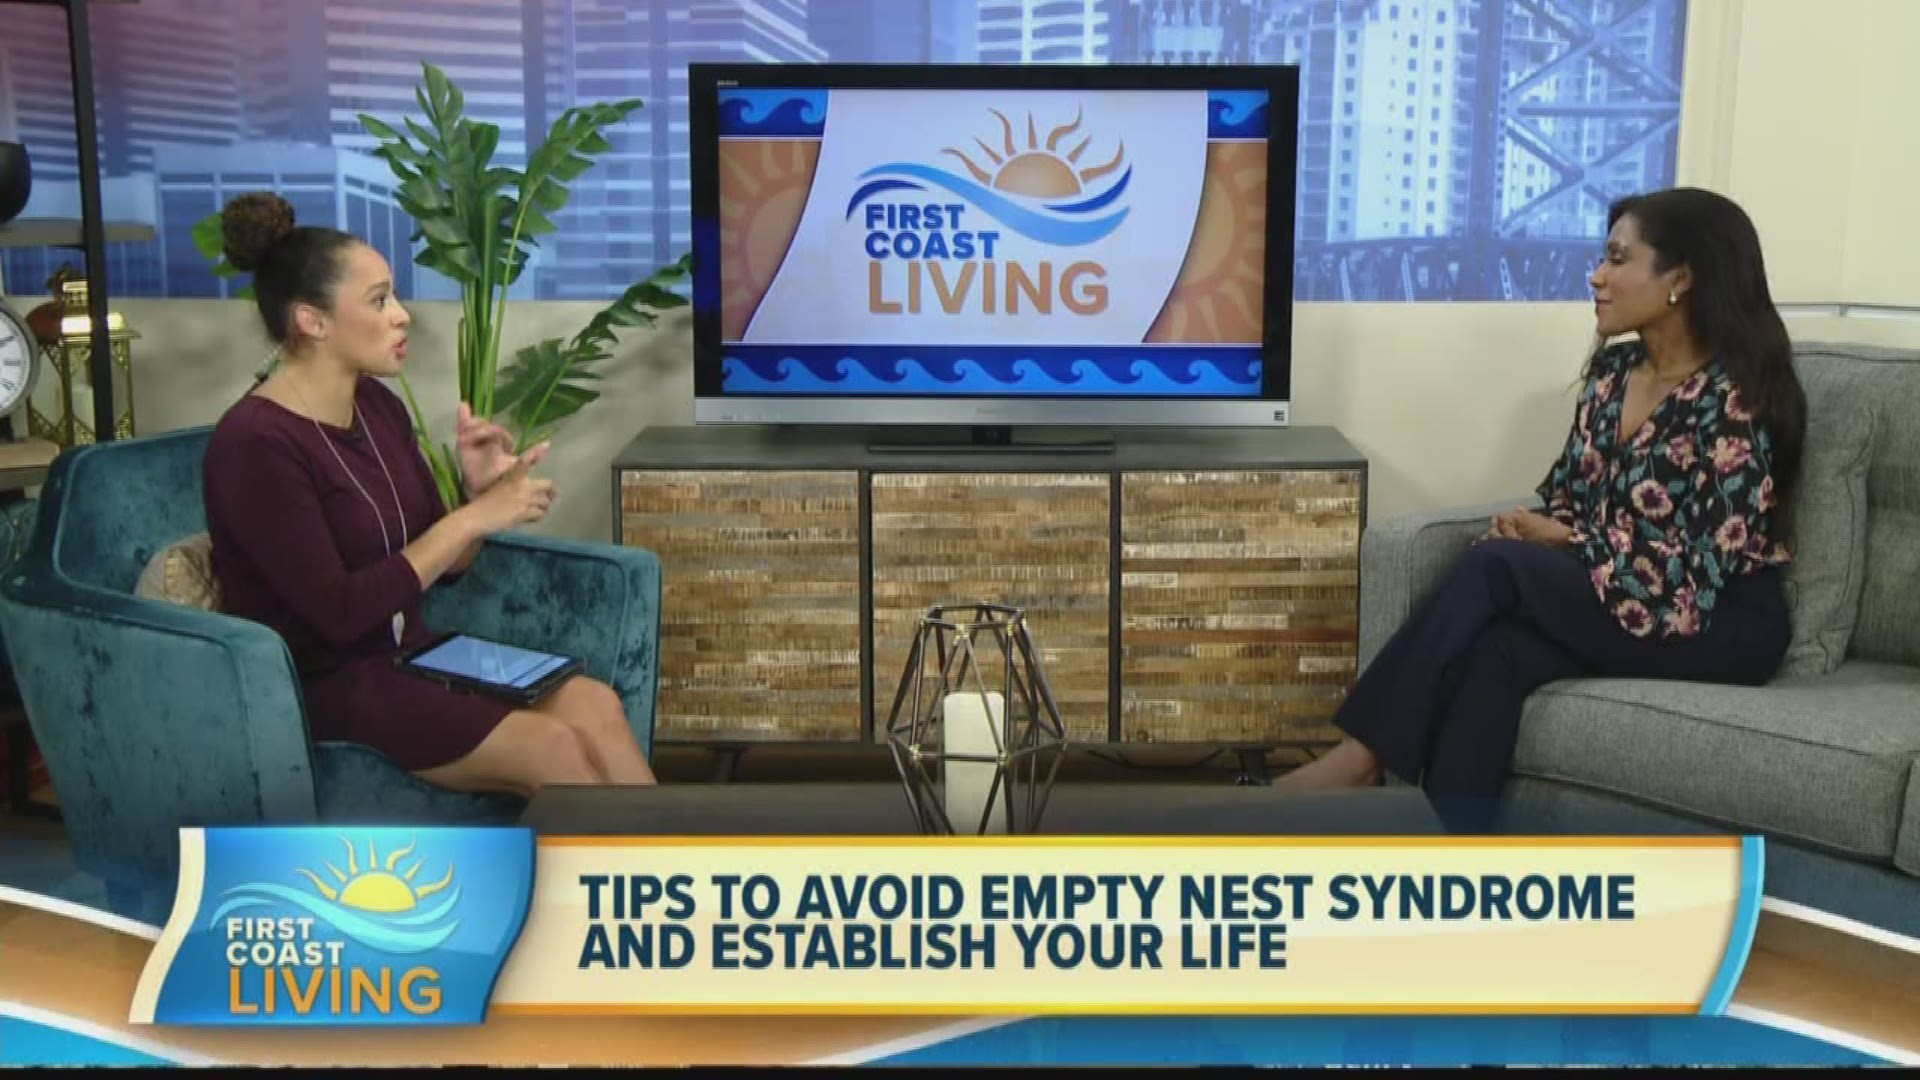 A holistic wellness doctor shares tips to avoid the negative effects of Empty Nest Syndrome.